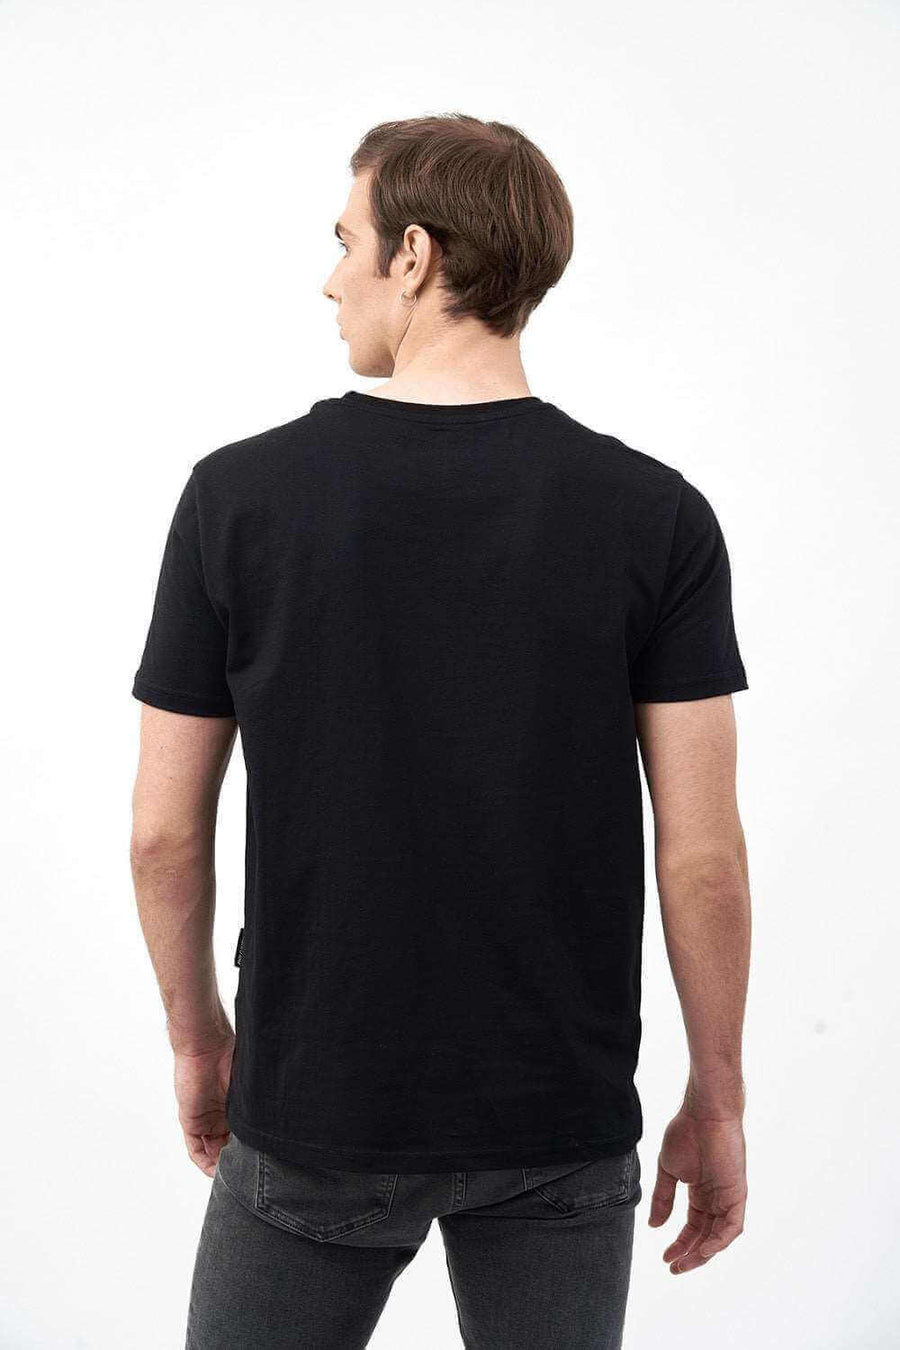 Back View of Crew Neck Men's Short Sleeve Shirts in Black